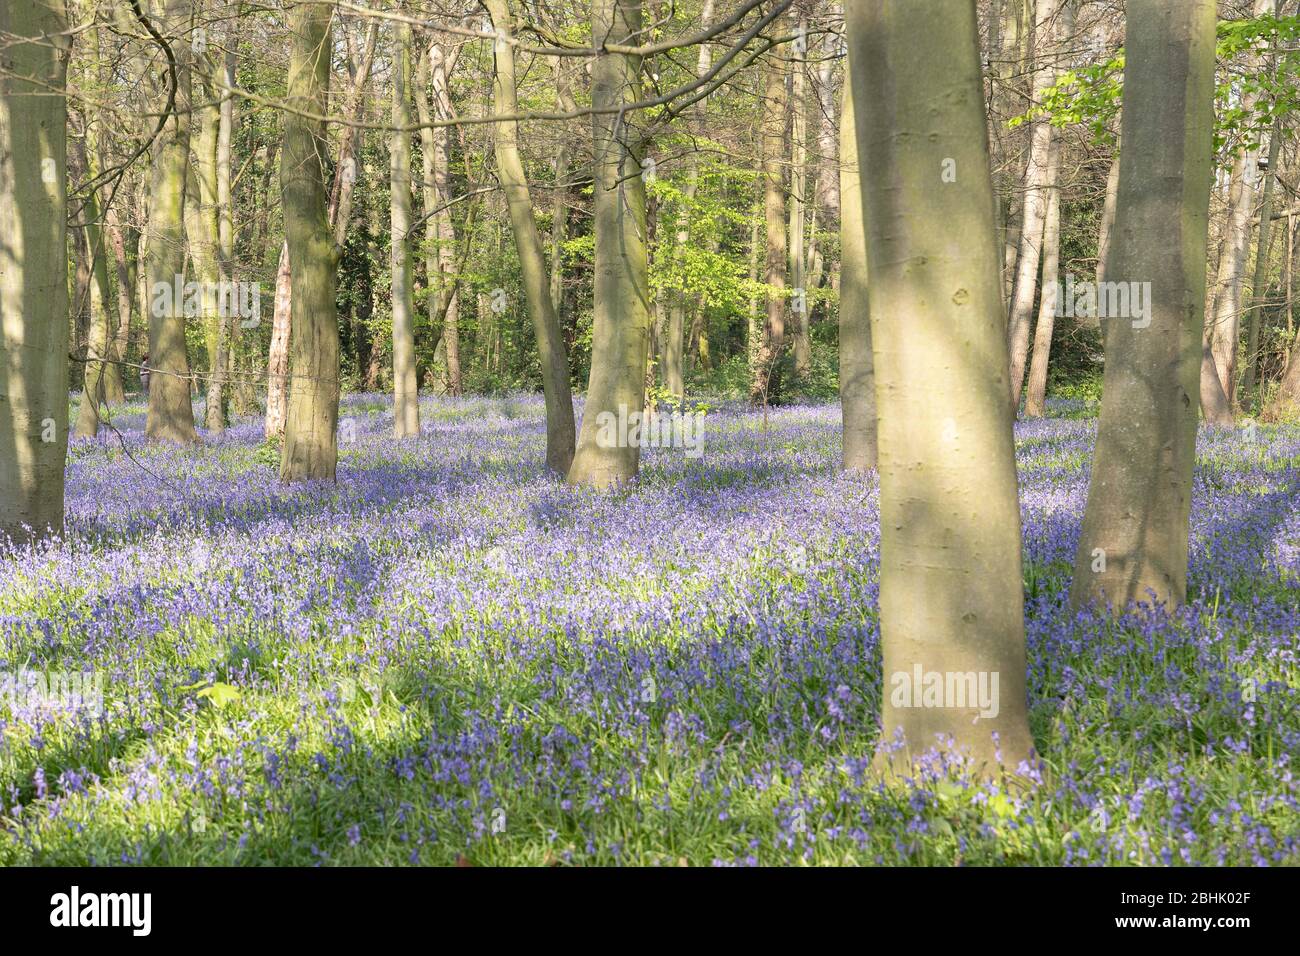 Bluebells in Chalet Wood,Epping Forest,Wanstead,London Stock Photo